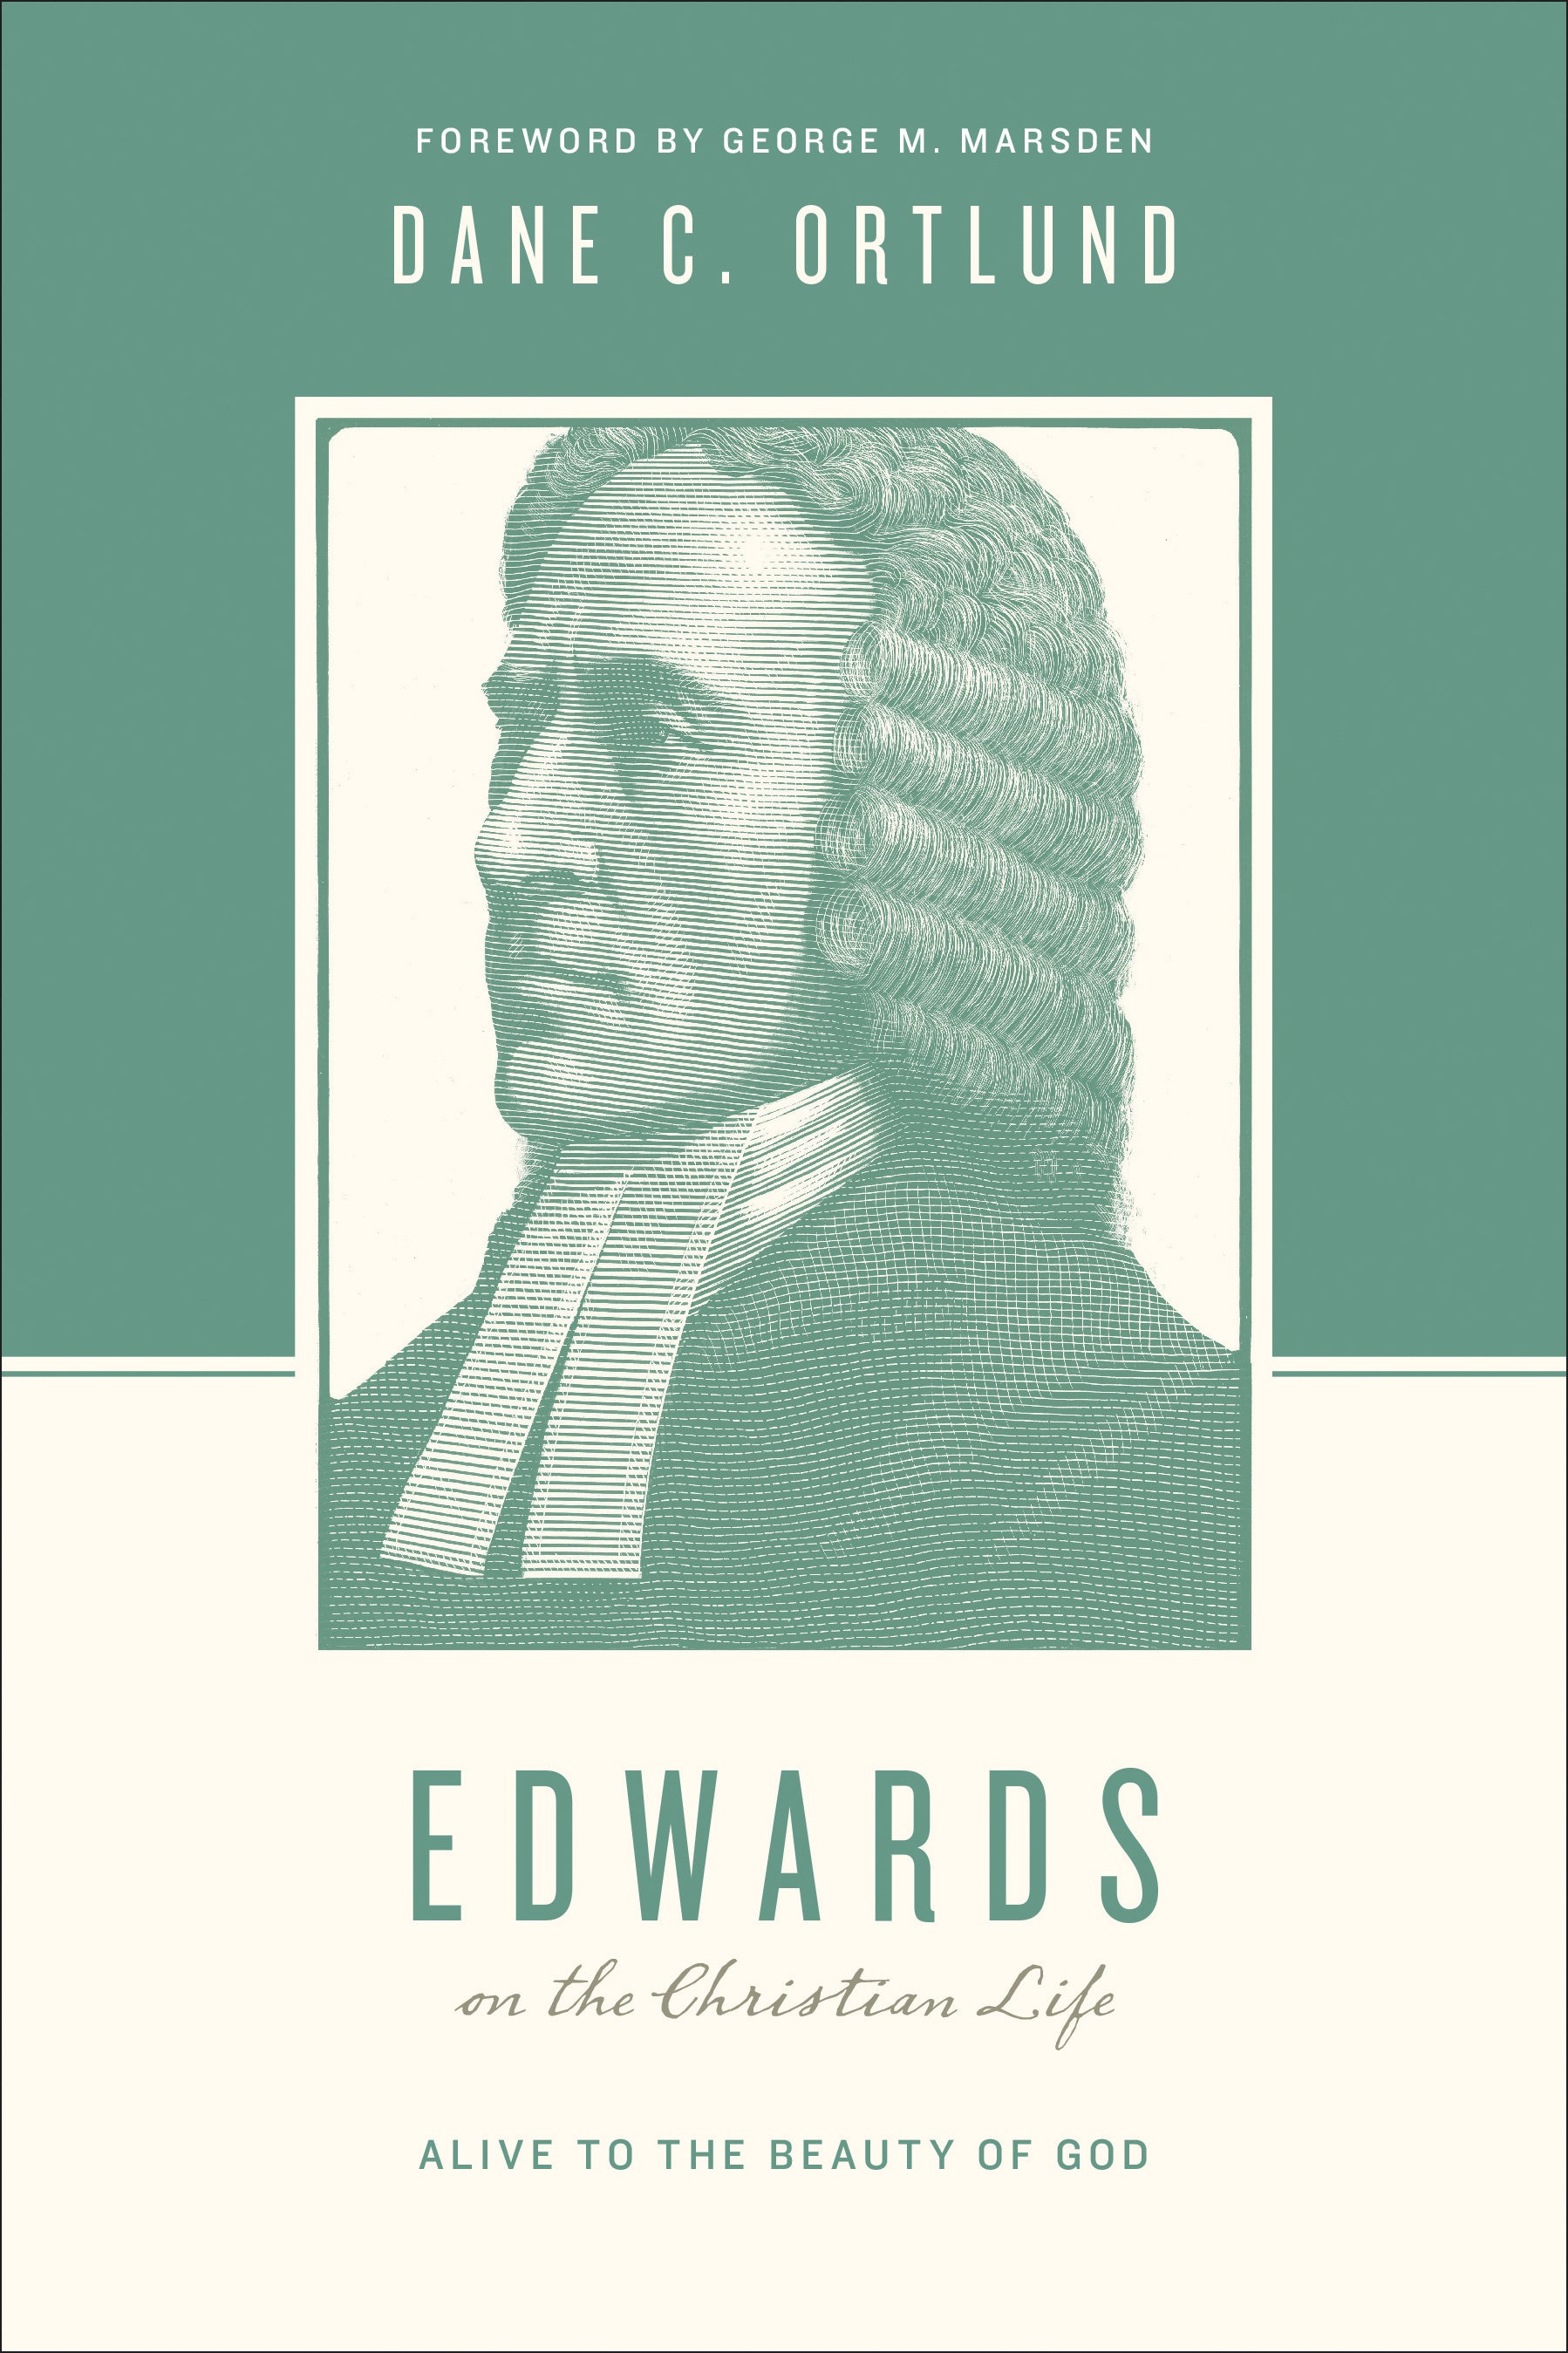 Image of Edwards on the Christian Life other